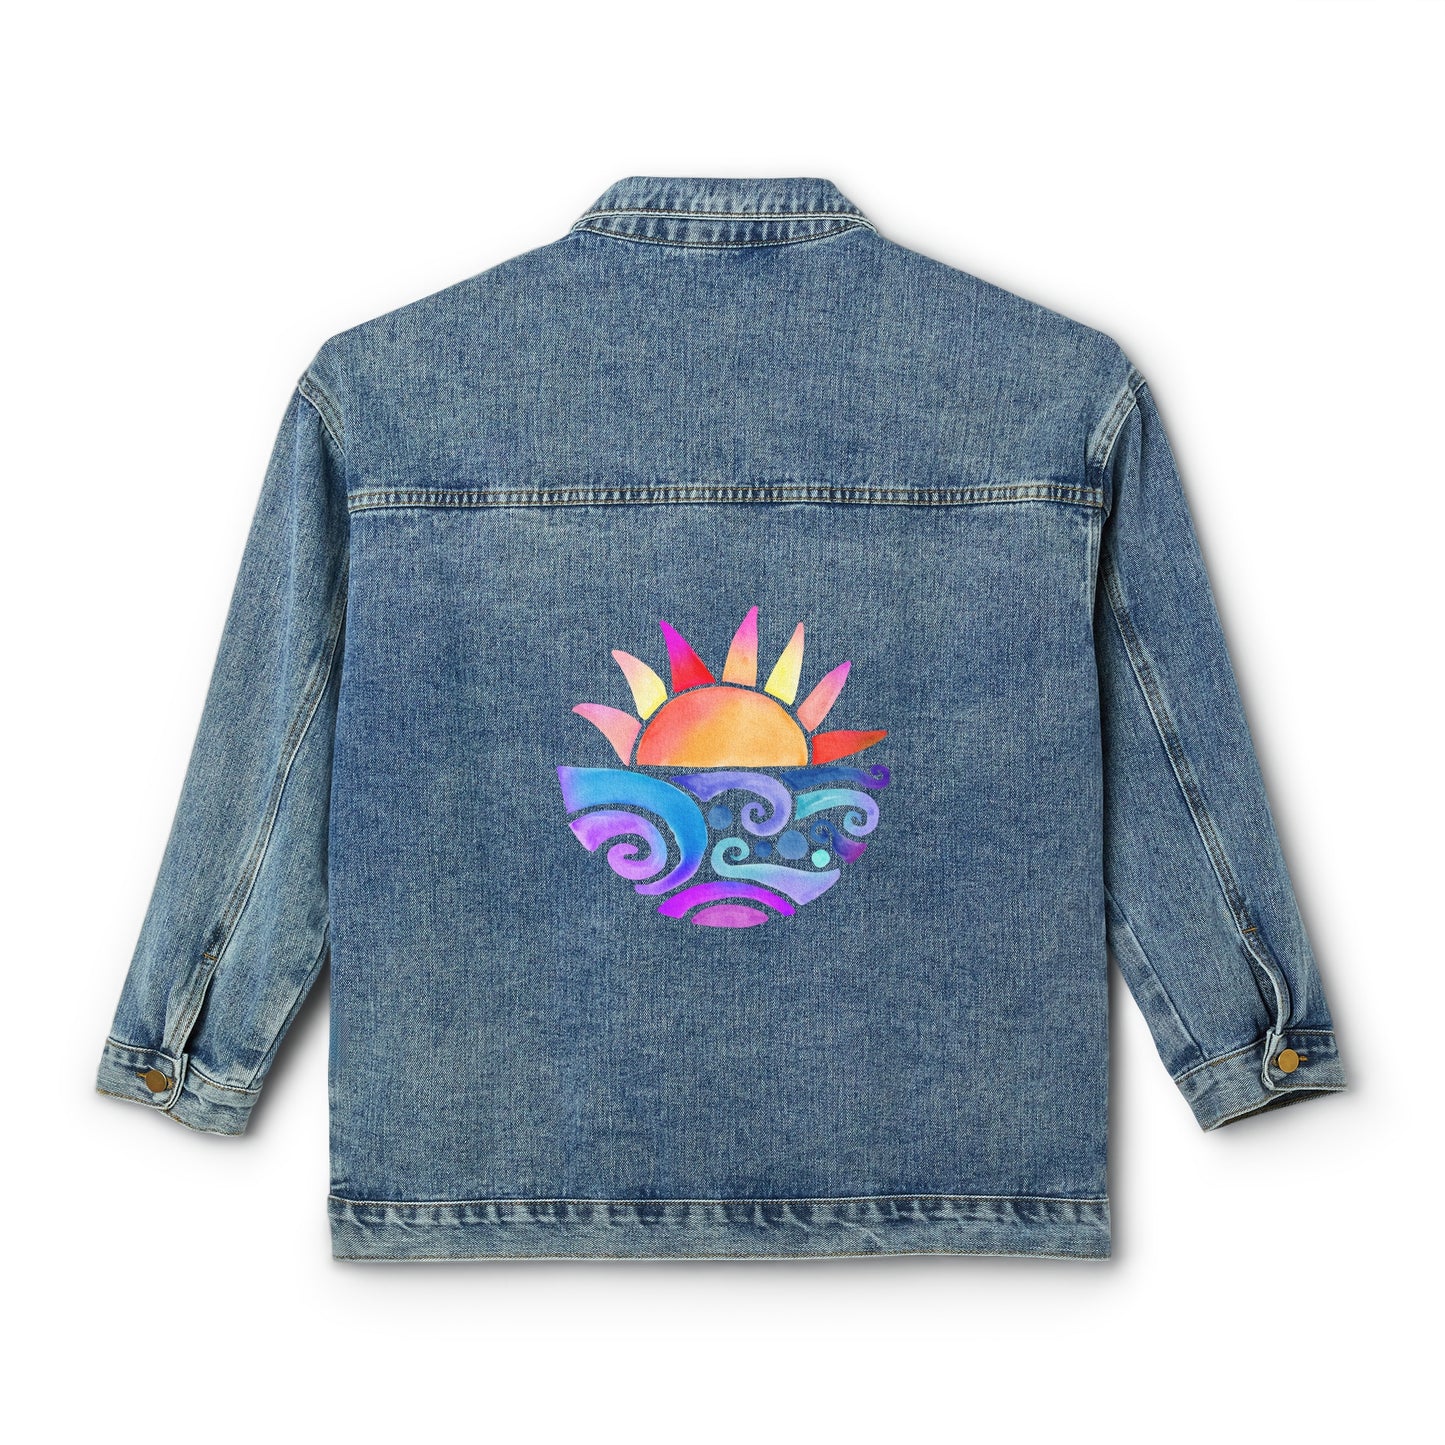 Flat back view featuring the Sixties Sunrise design